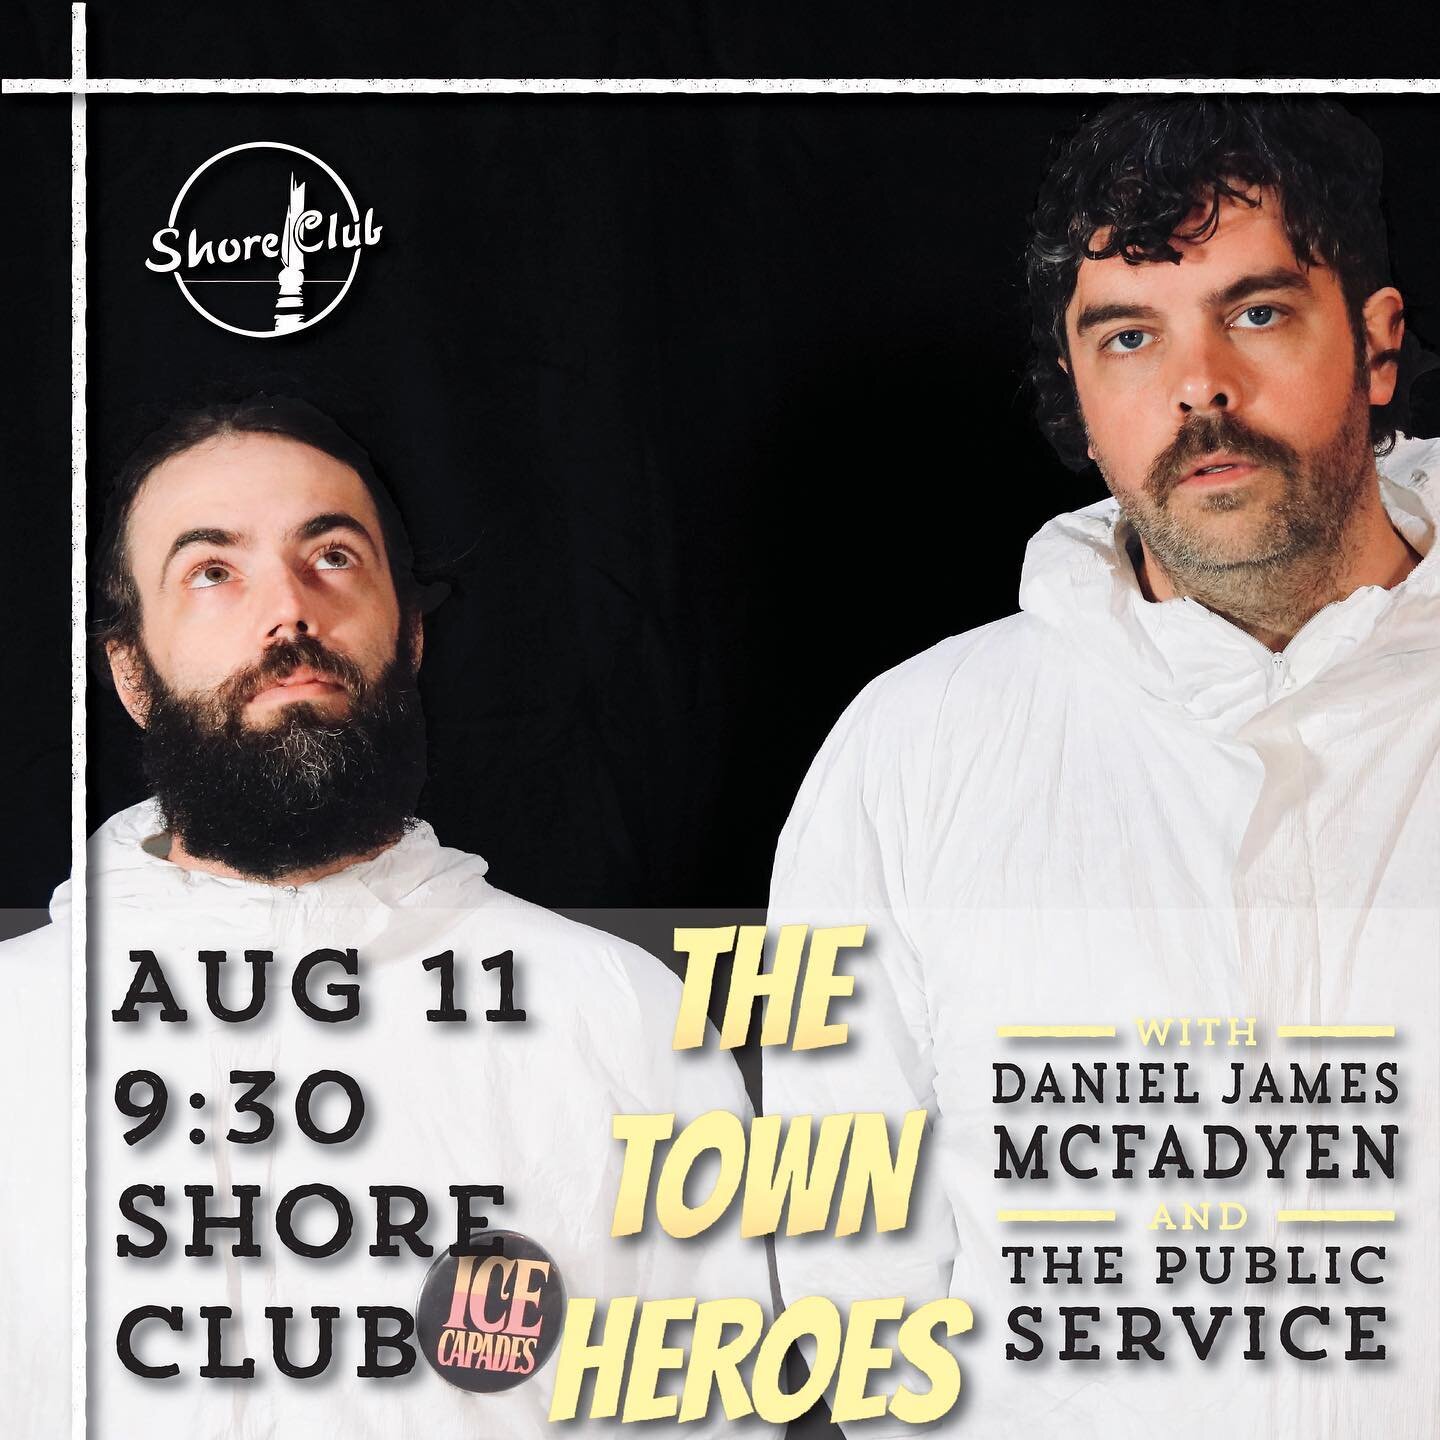 Very excited to have The Town Heroes back on stage Aug 18 9:30 19+
They are bringing along a pretty solid line up to keep the party rocking🦞🎤🎉 joining them is one of Canada&rsquo;s rising stars @danieljamesmcfadyen and @thepublichouseband 
🎫 on s